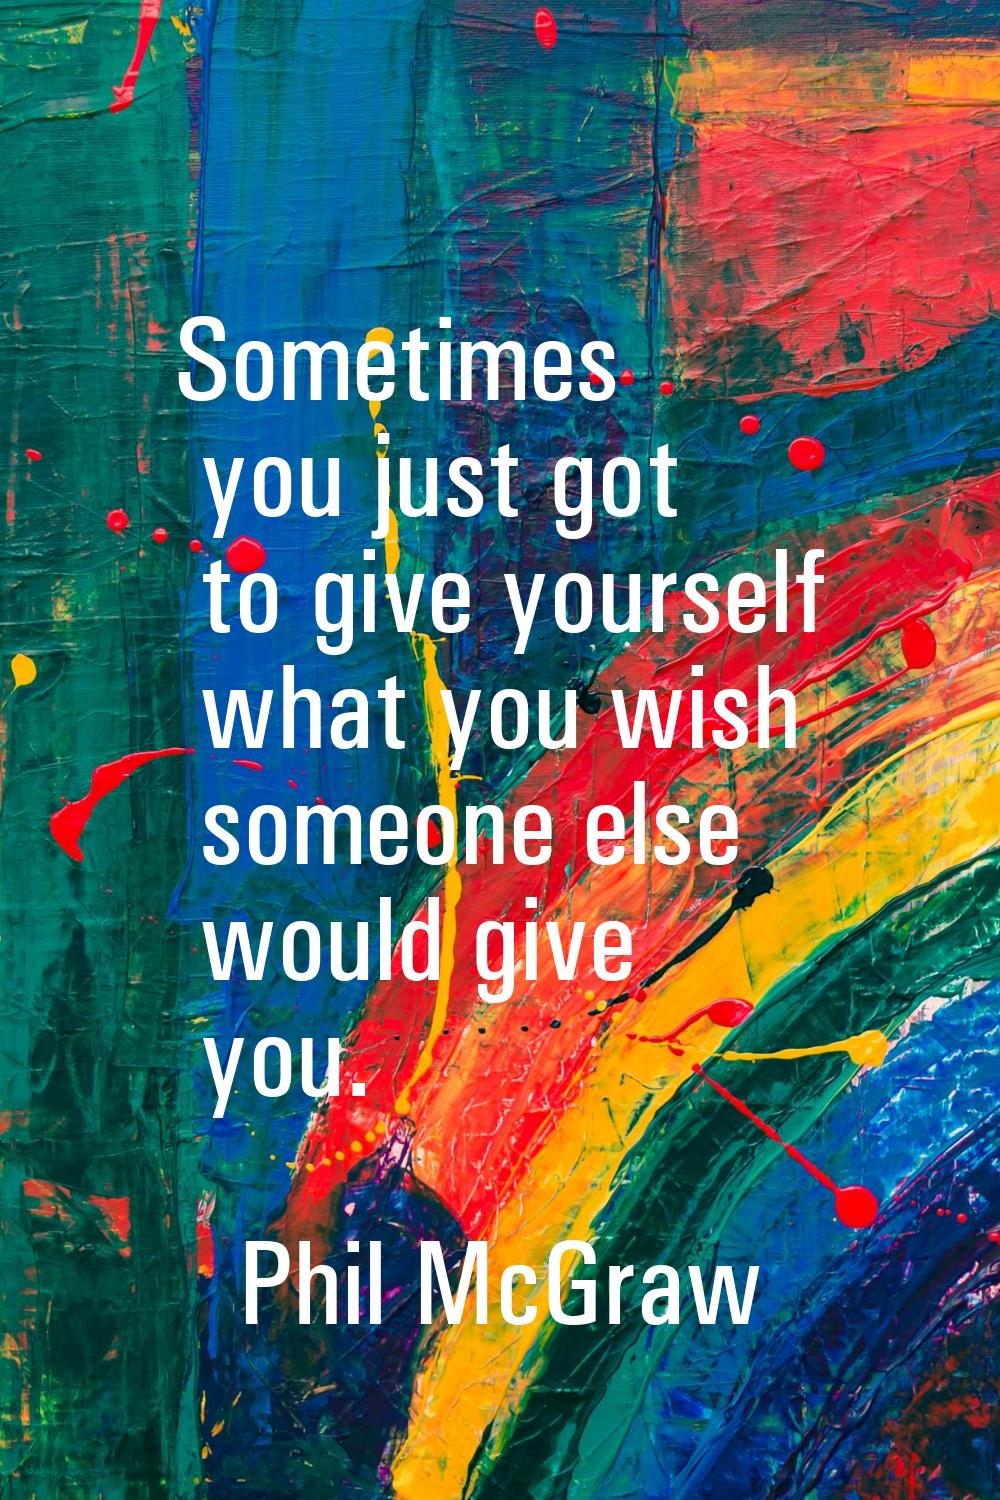 Sometimes you just got to give yourself what you wish someone else would give you.